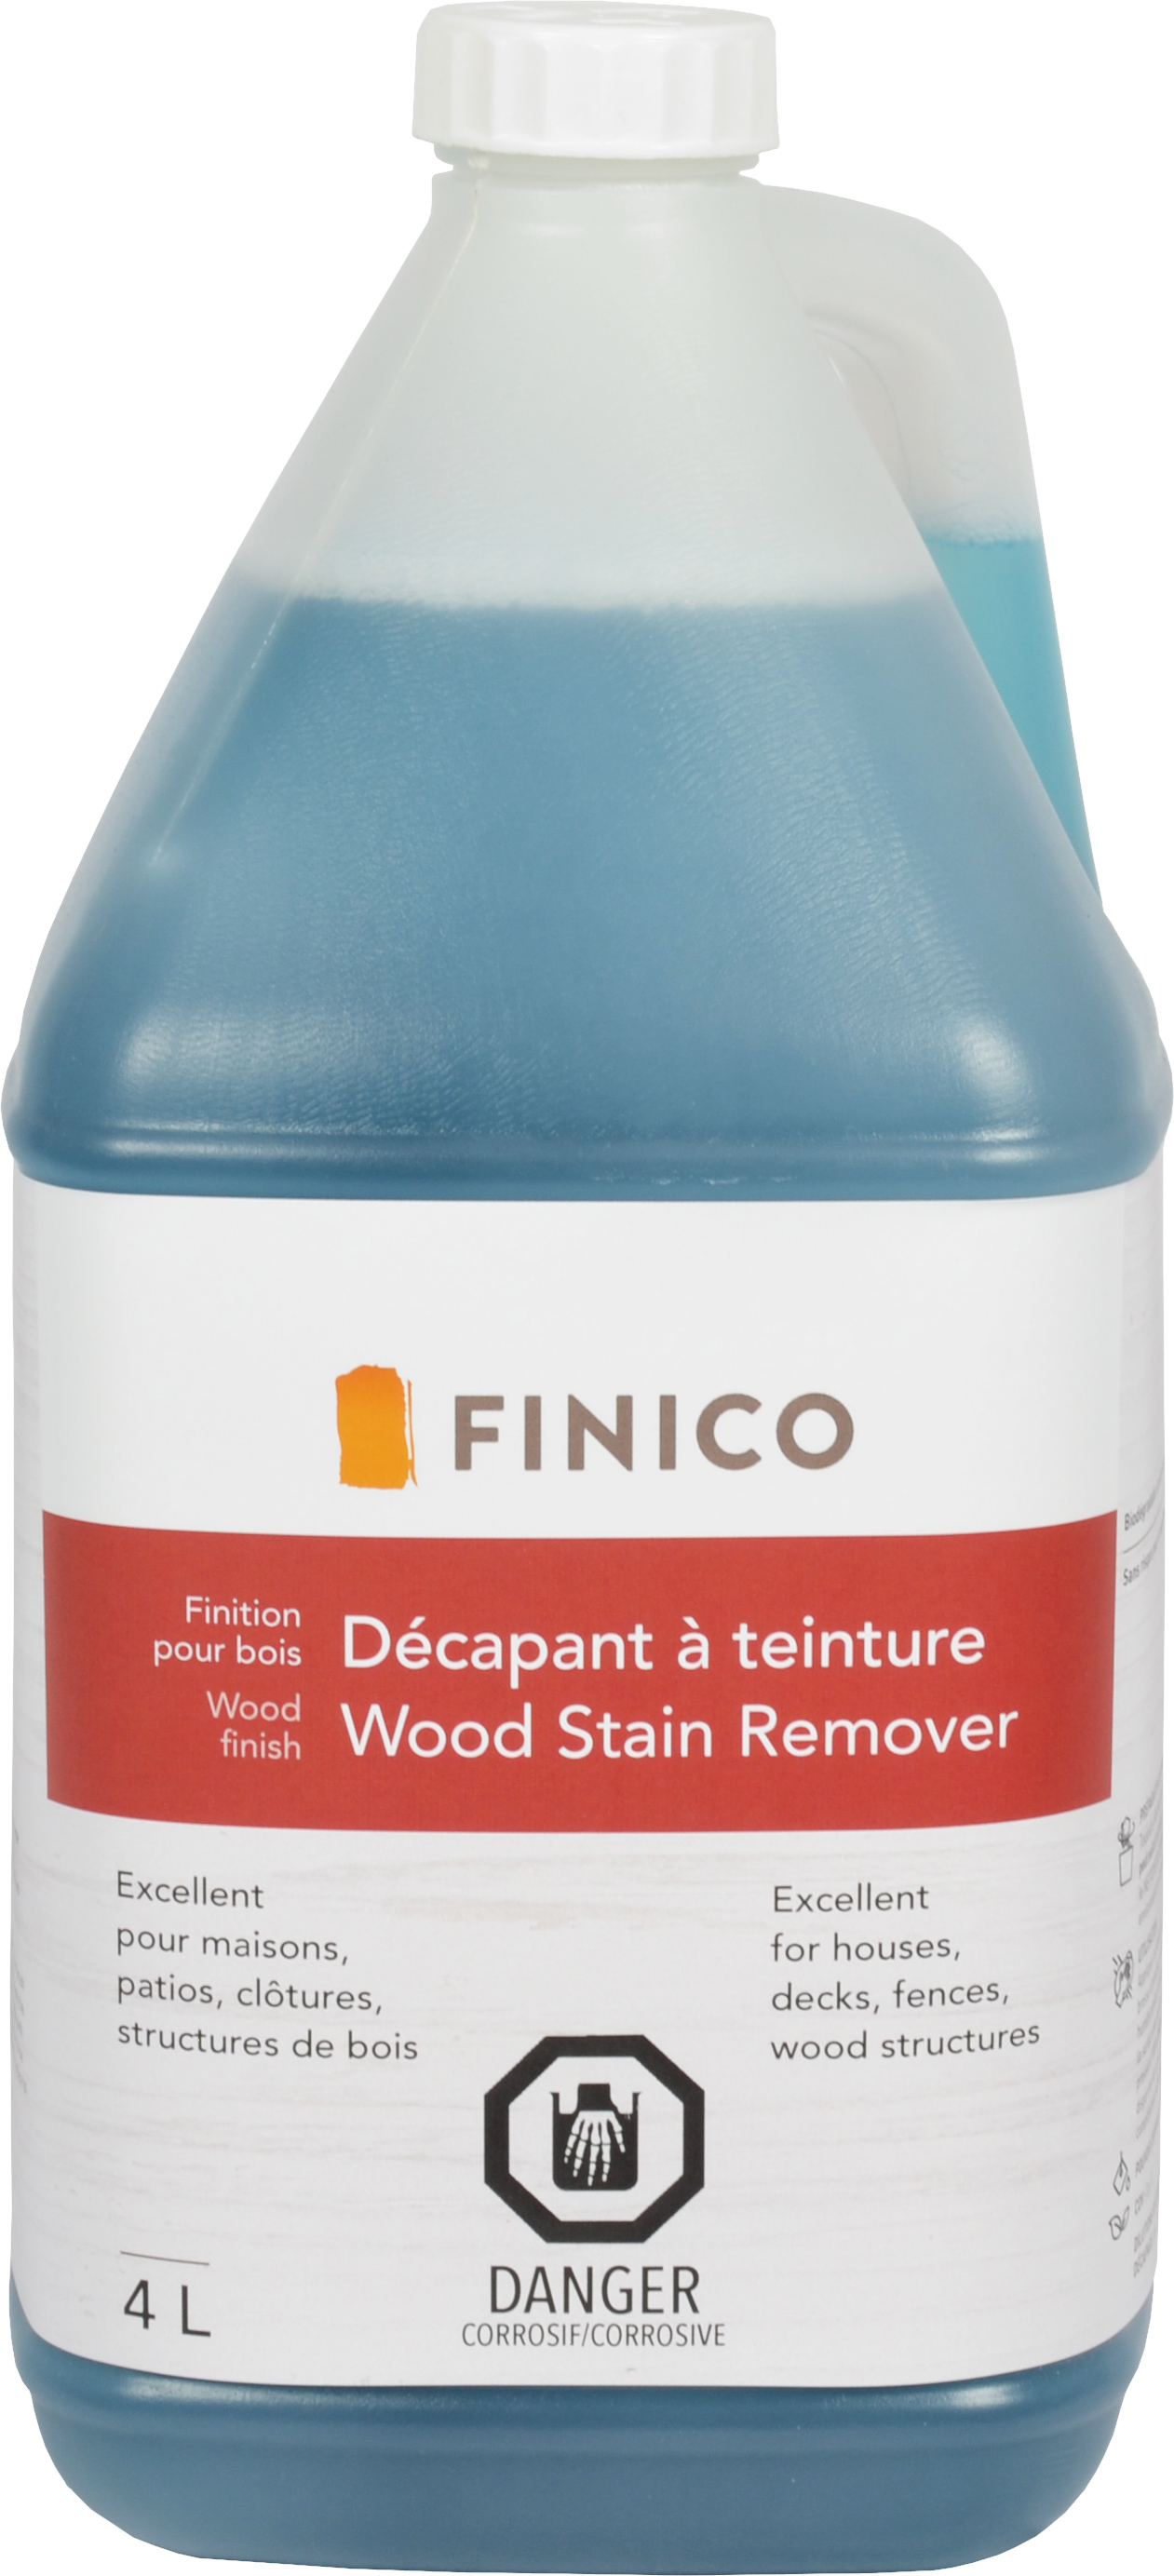 Wood Stain Remover Finico